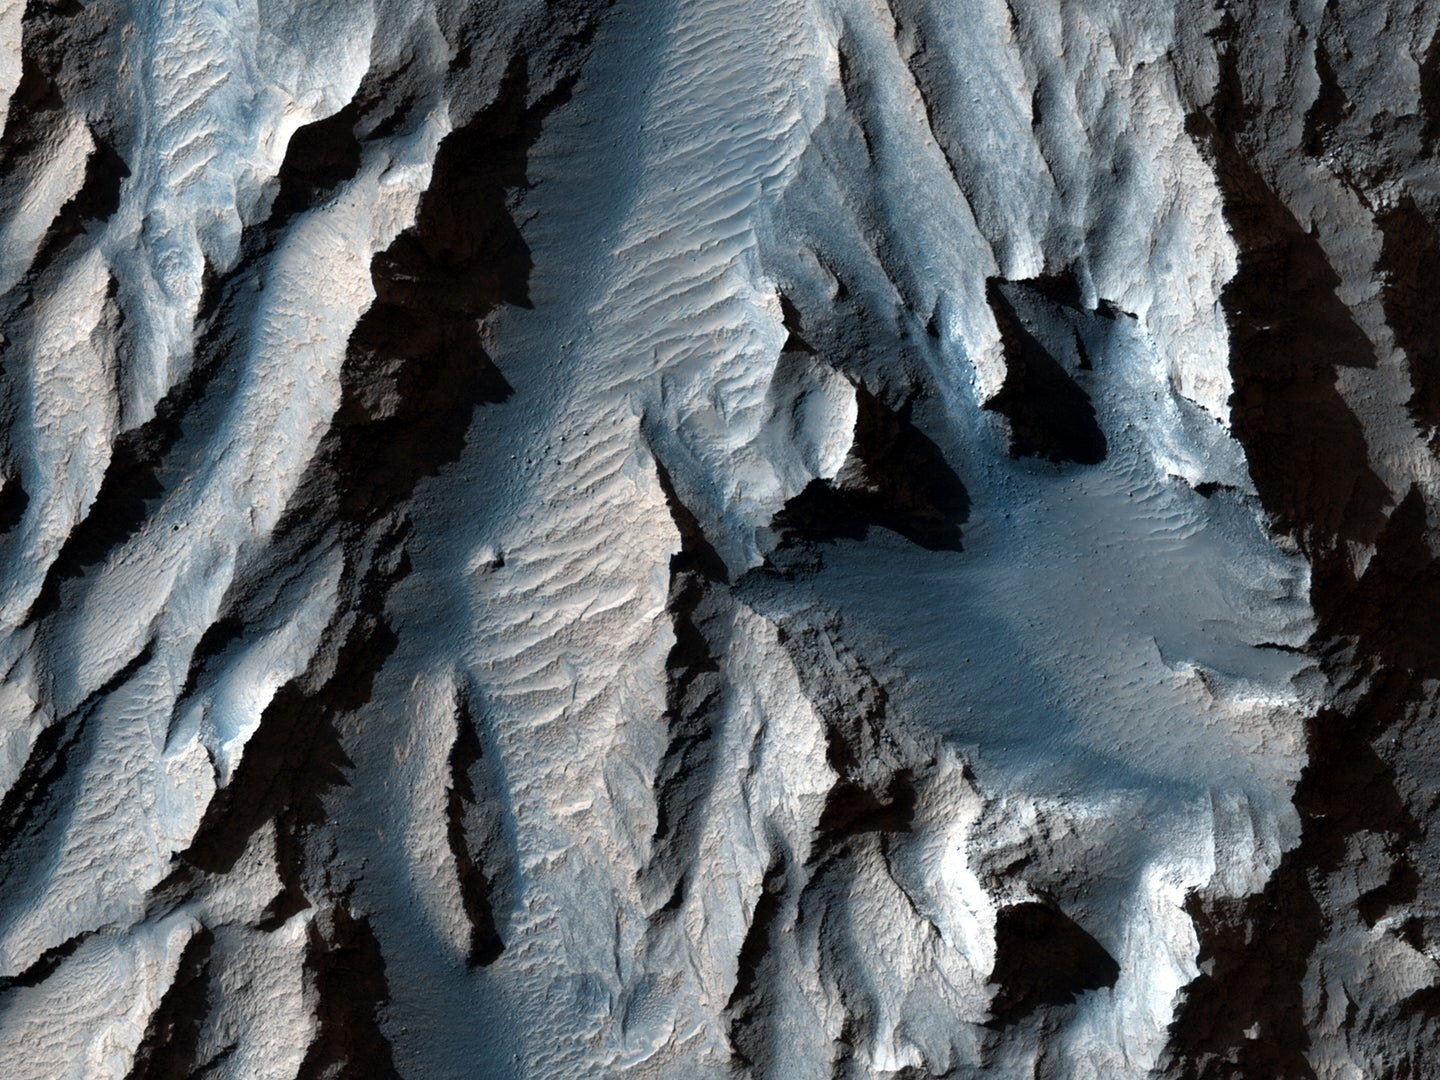 A close-up view of Tithonium Chasma, which is feature of Valles Marineris, the solar system's largest canyon.